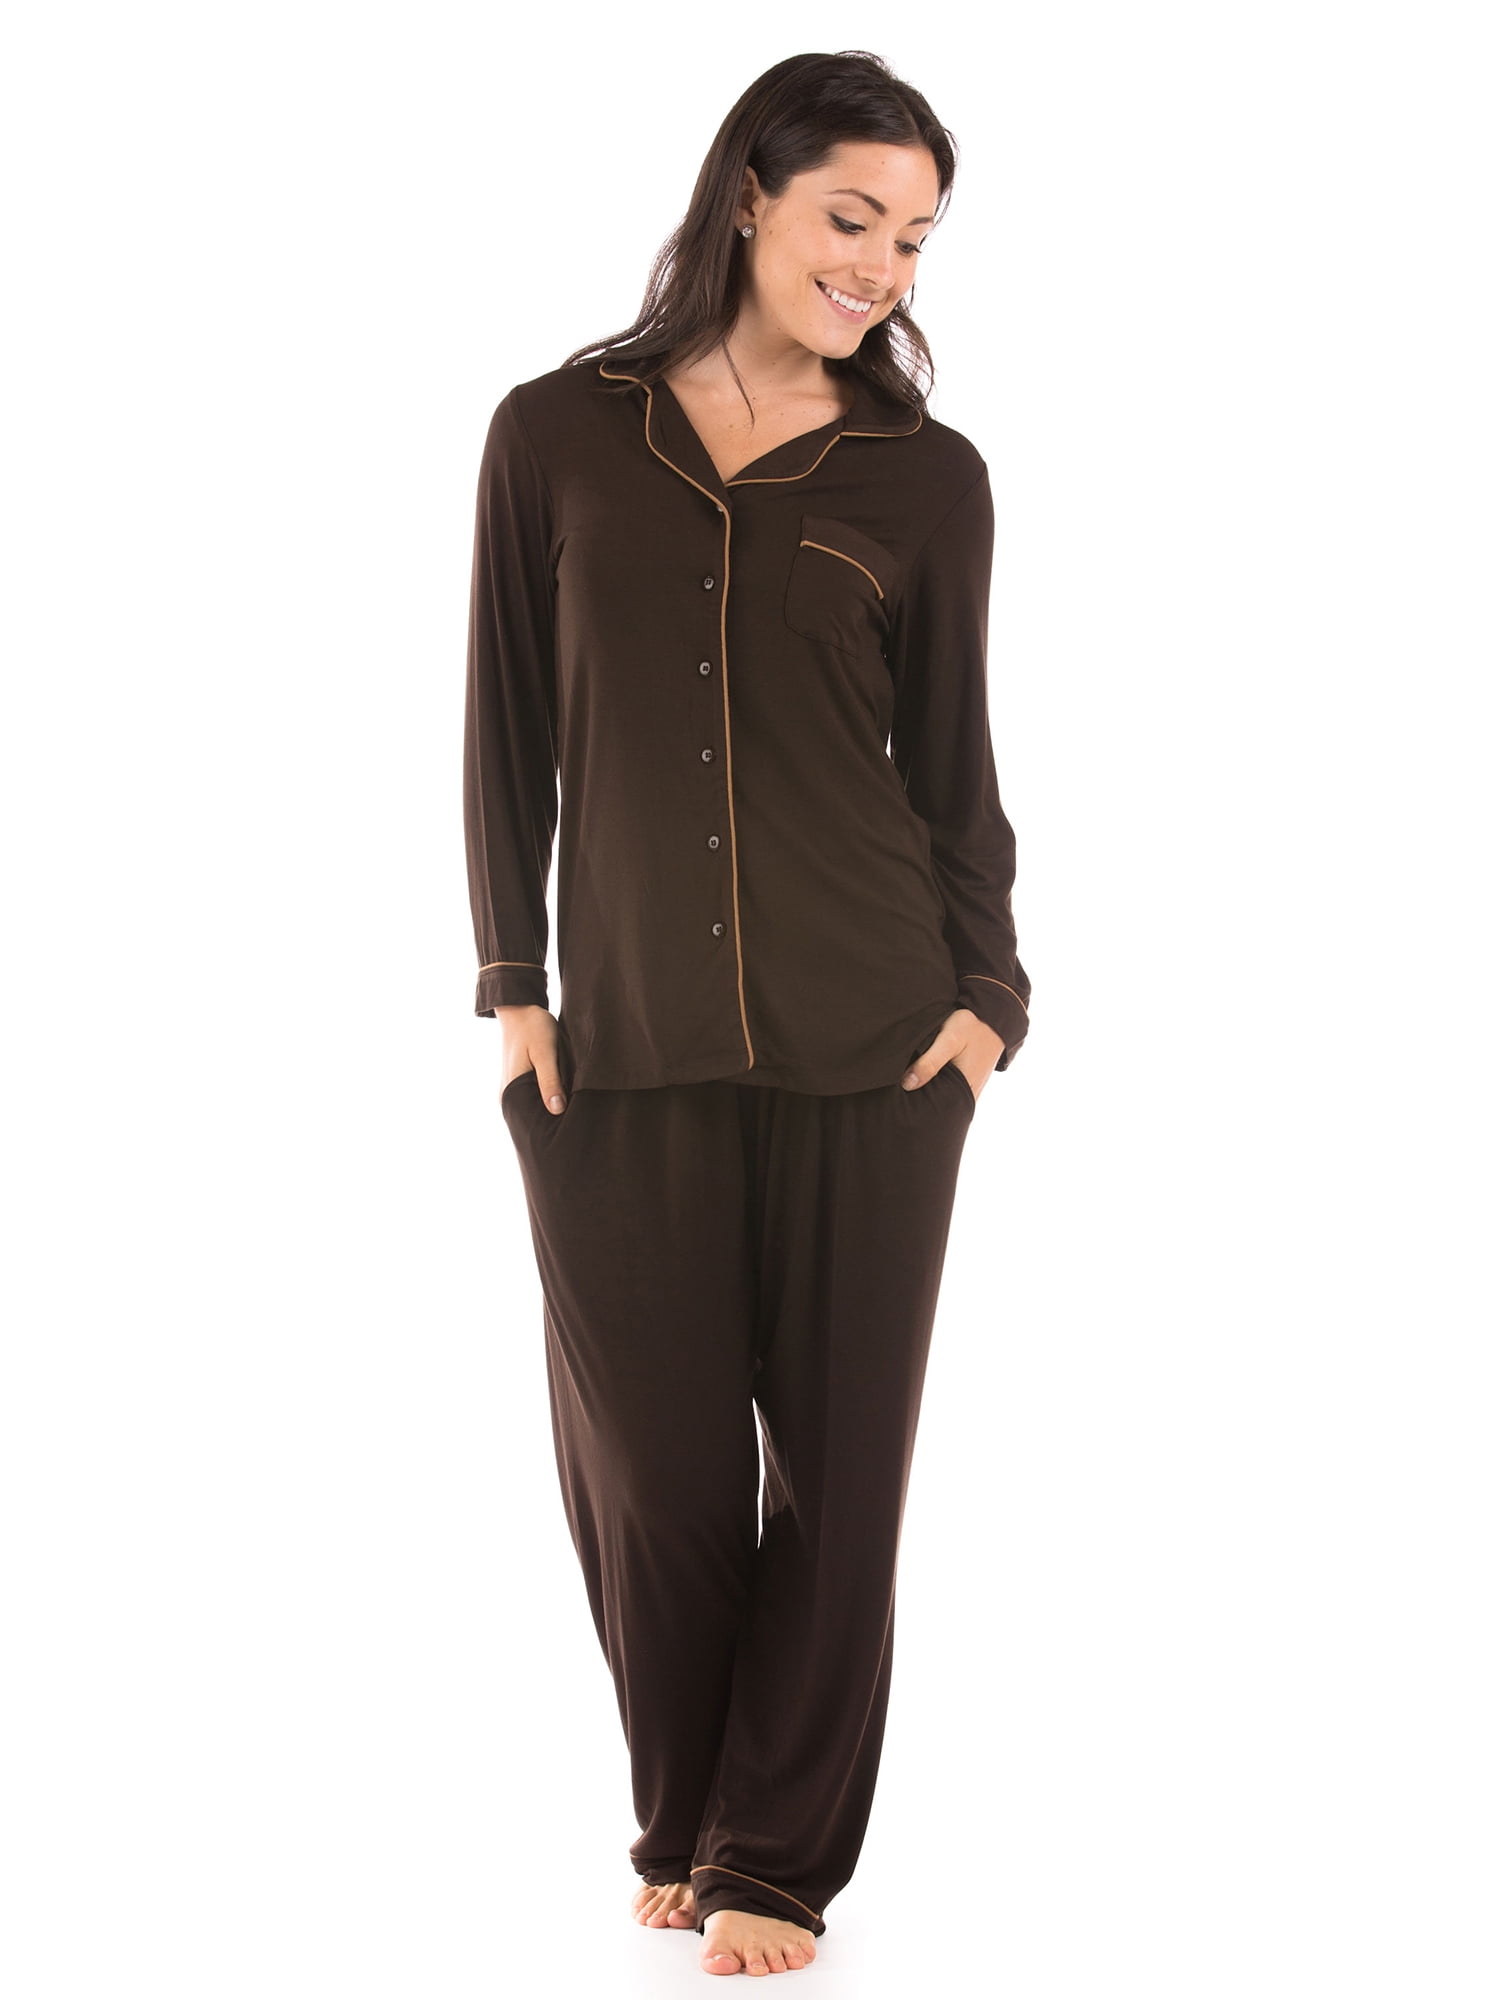 Texere - Women's Button-Up Long Sleeve Pajamas - Sleepwear set by